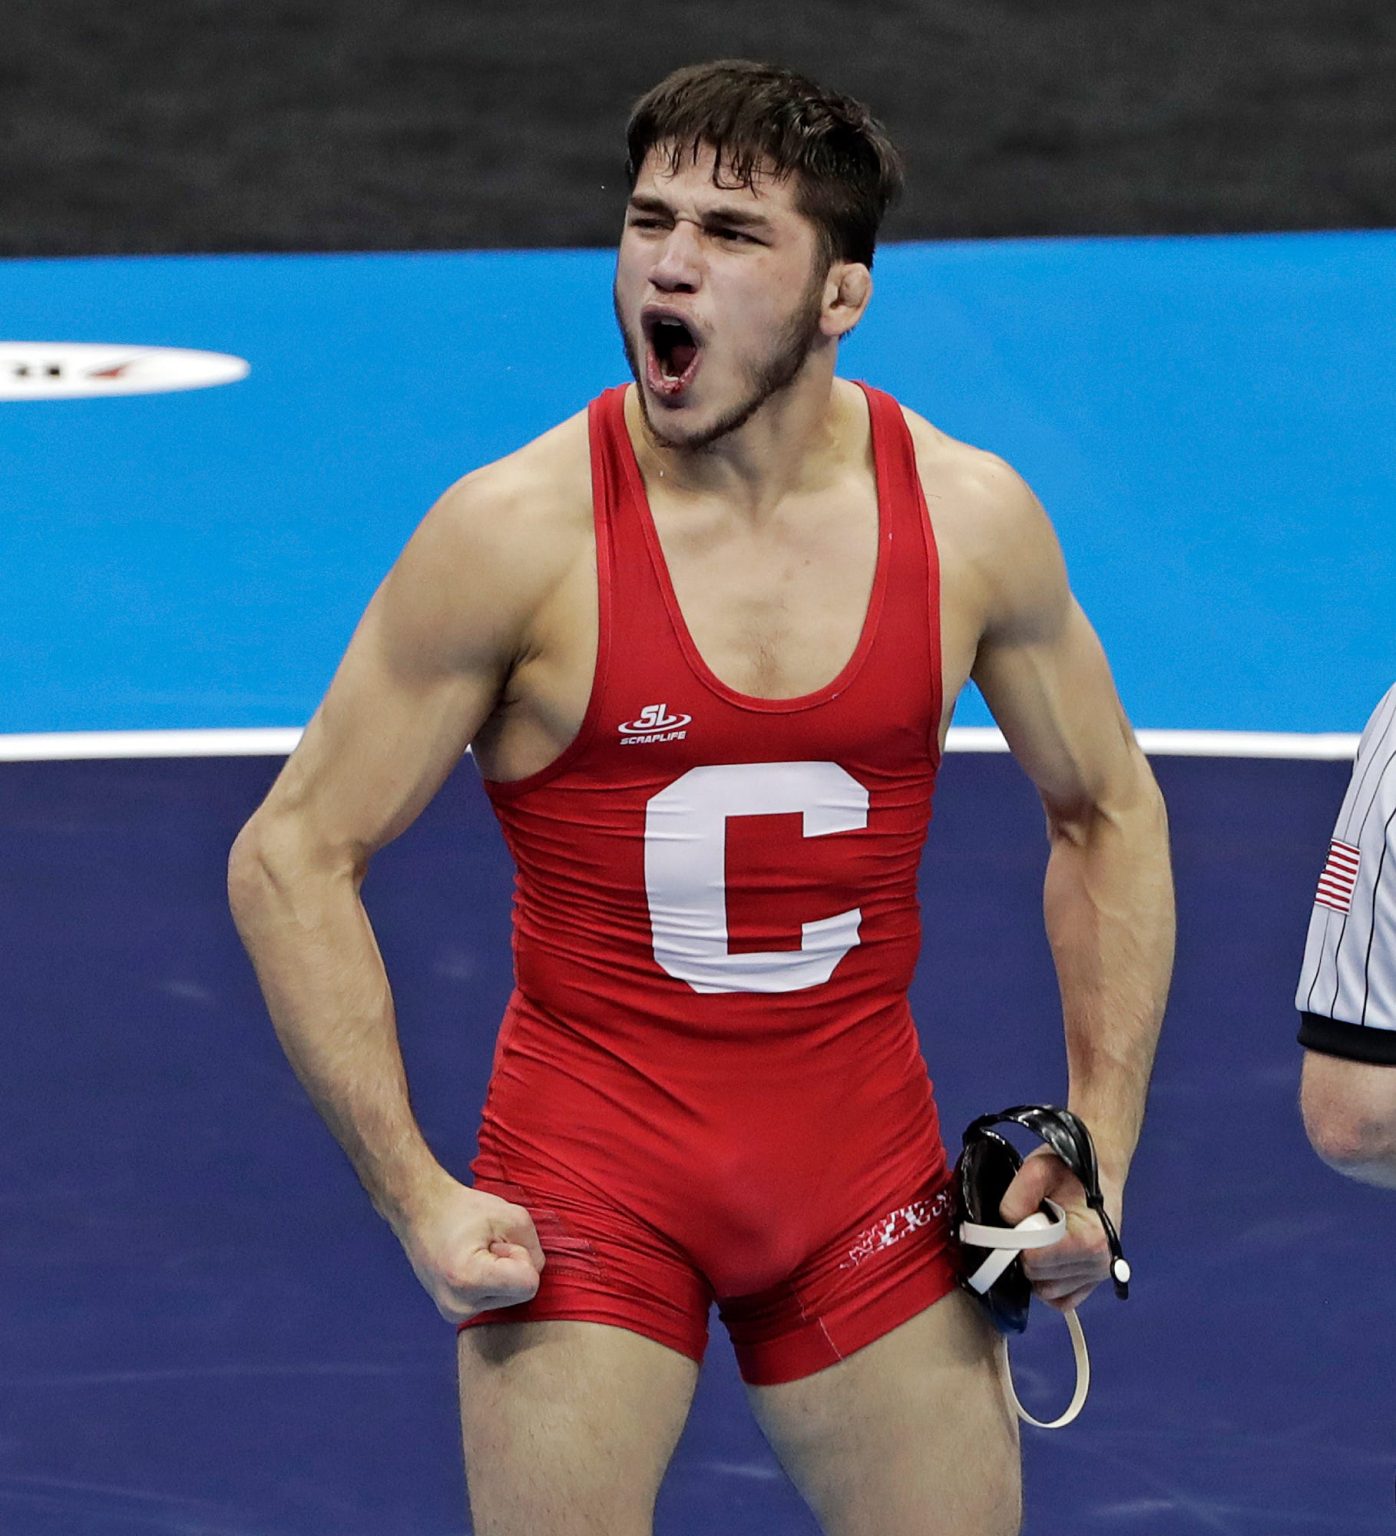 Who Was the Outstanding Wrestler in the NCAA Wrestling Championships?